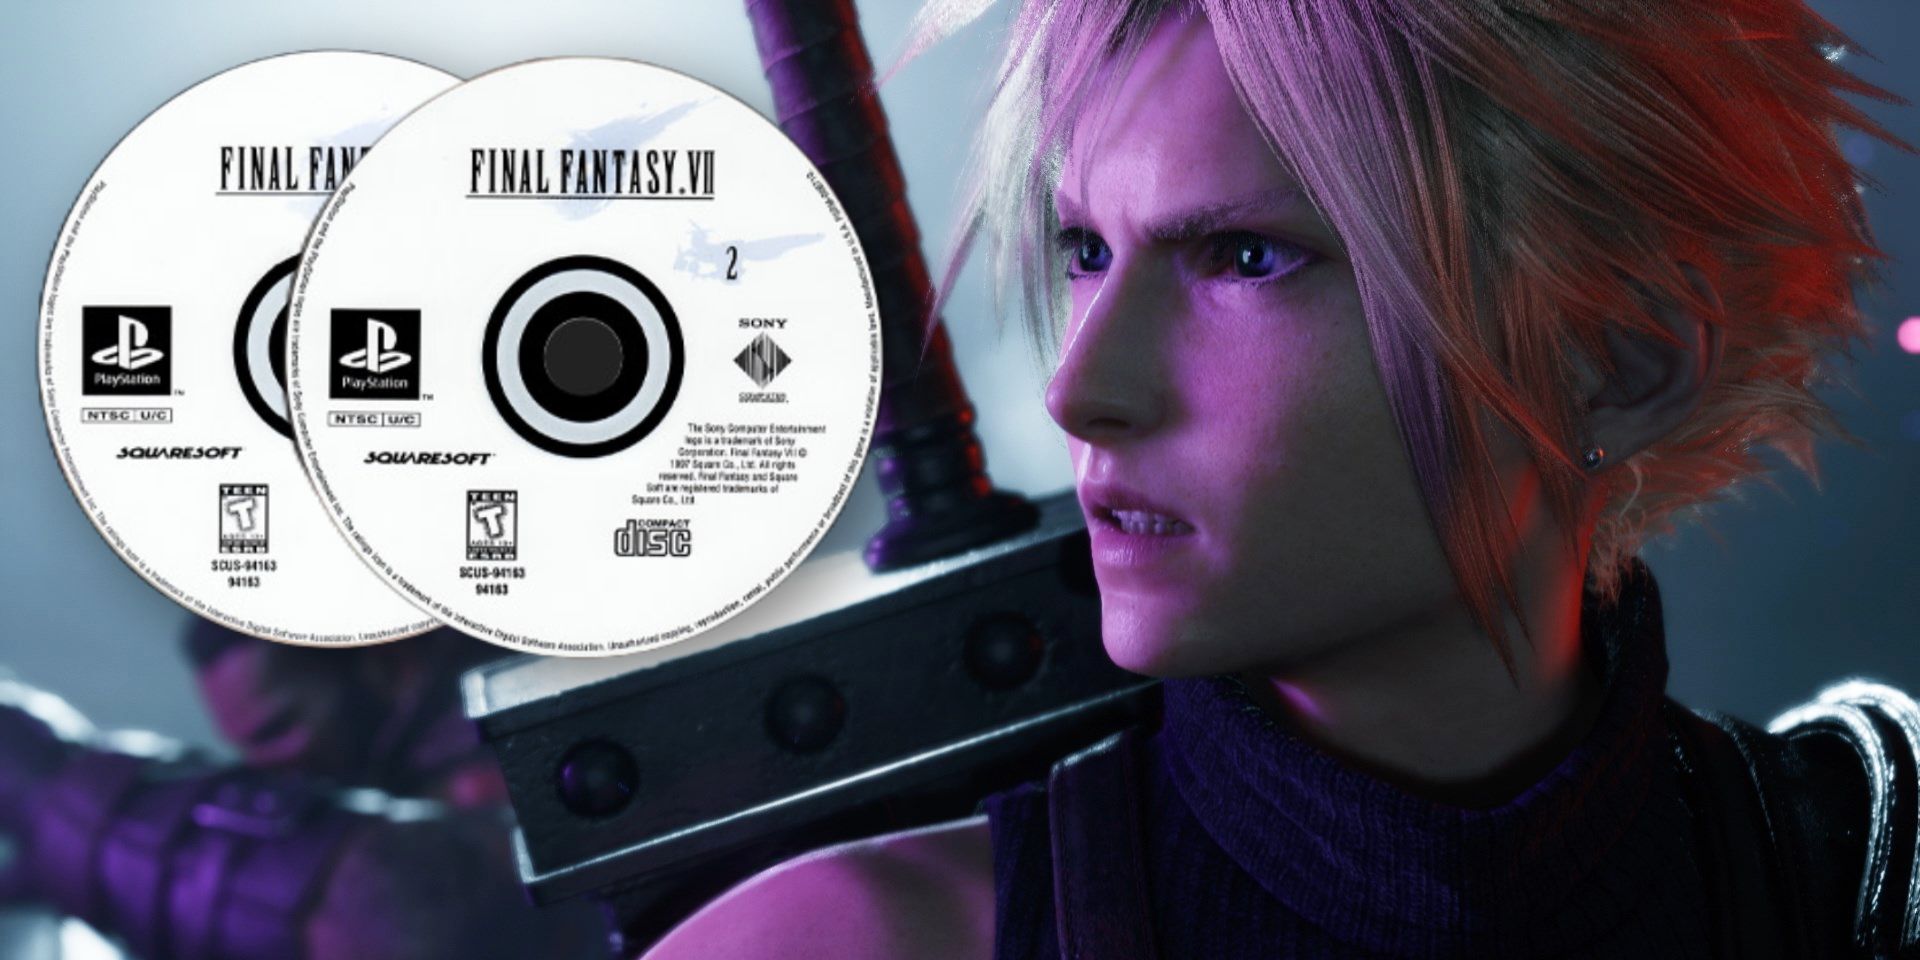 Final Fantasy 7 Rebirth is on 2 discs for PS5, just like FF7